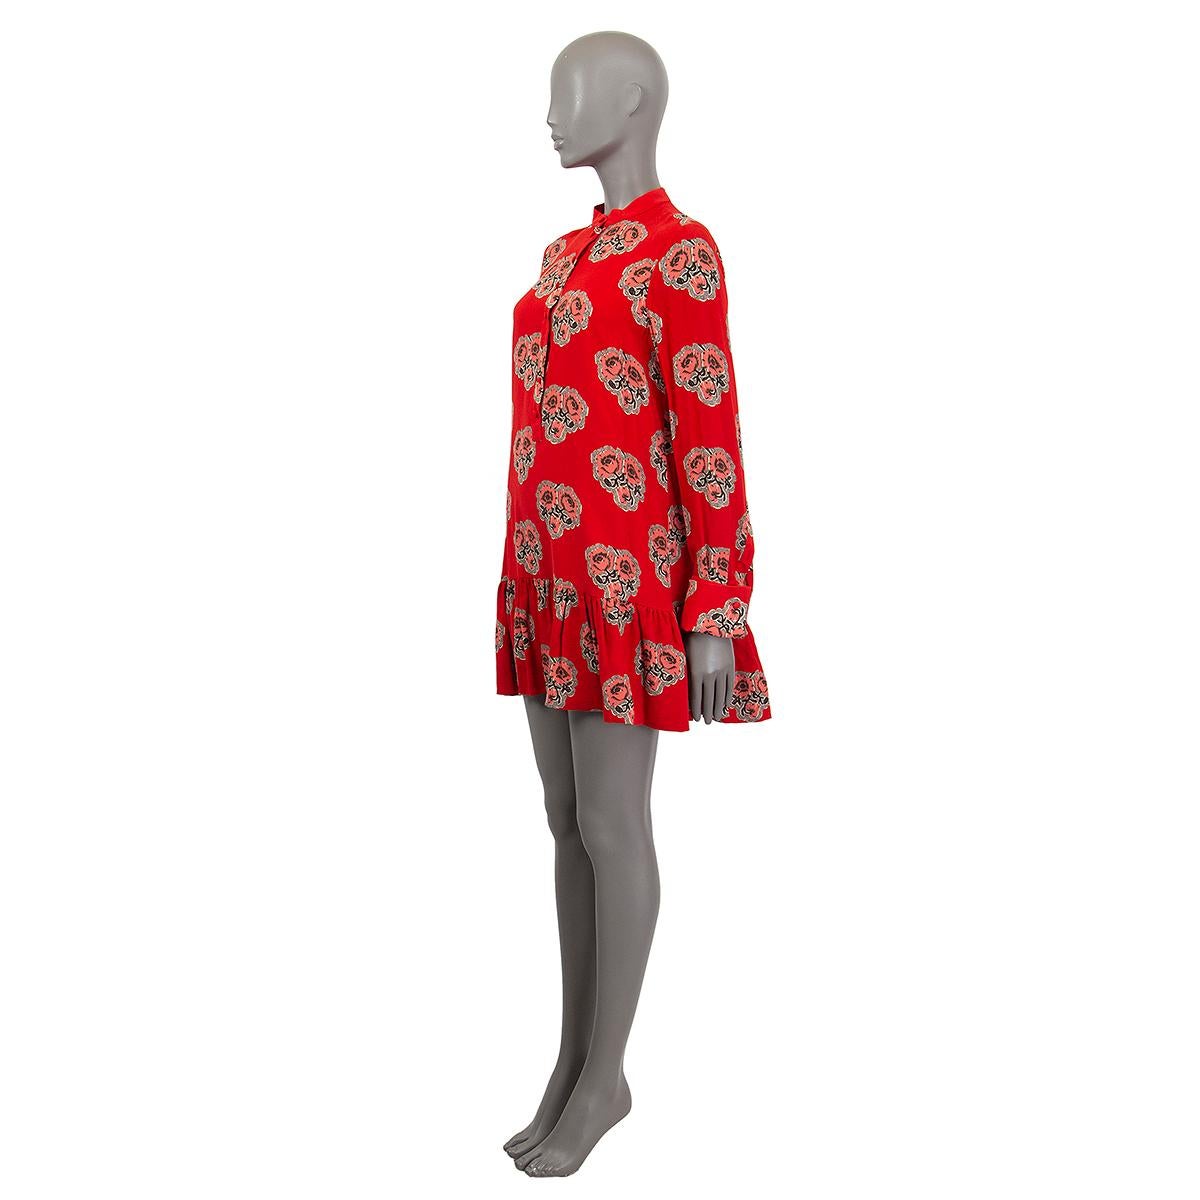 Alexander McQueen floral-print drop-waist dress in red silk georgette (100%). Has a mandarine collar, button front, cuffed long sleeves. Lined in silk (100%). Has been worn and is in excelelnt condition.

Tag Size 42
Size M
Shoulder Width 40cm